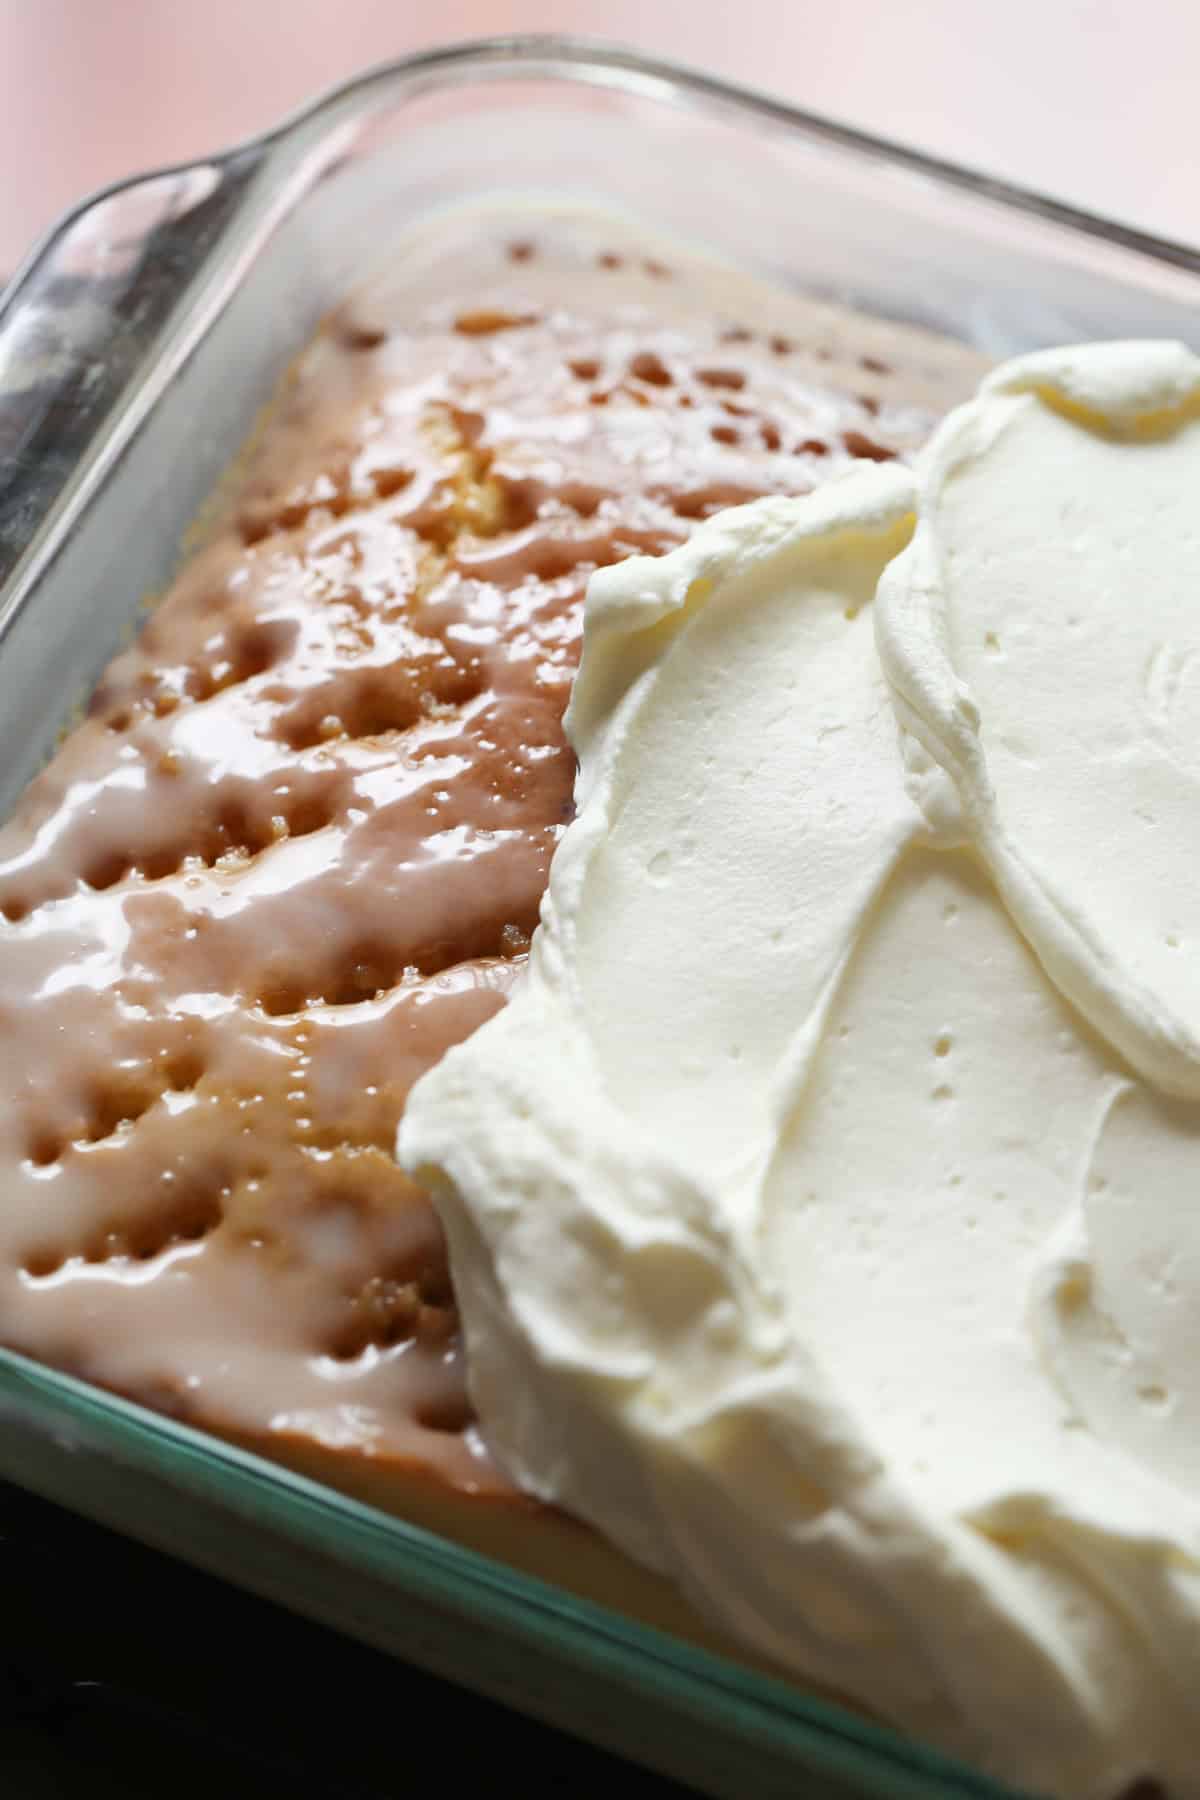 Poke cake being frosted with whipped topping